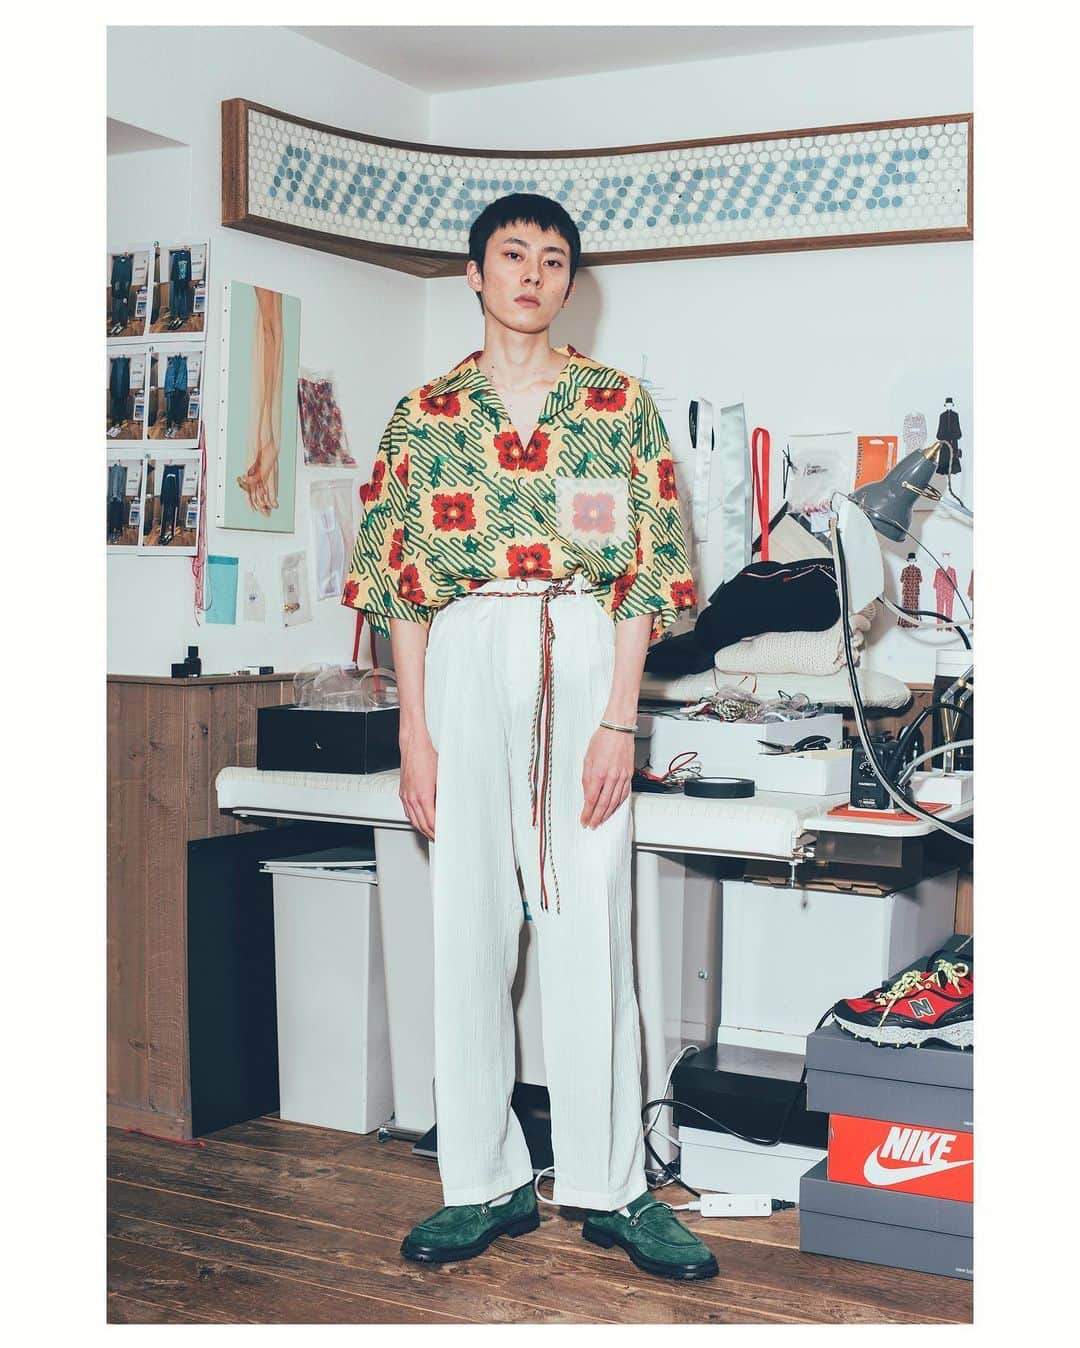 NEONSIGNのインスタグラム：「…2021 SPRING SUMMER COLLECTION﻿ ﻿ “MMMMMMWMMM”﻿ ﻿ Whenever you find that you are on the side of the Majority, it is to reform.﻿ ﻿ …﻿ ﻿ Directed by﻿ ﻿ Photographer：TARO MIZUTANI﻿ Stylist：LAMBDA TAKAHASHI﻿ Hair & Make-up：MASANORI KOBAYASHI﻿ ﻿ Model：﻿EIICHI ﻿ ...﻿ #NEONSIGN﻿ #ASUKAHAYASHI﻿ #MMMMMMWMMM」